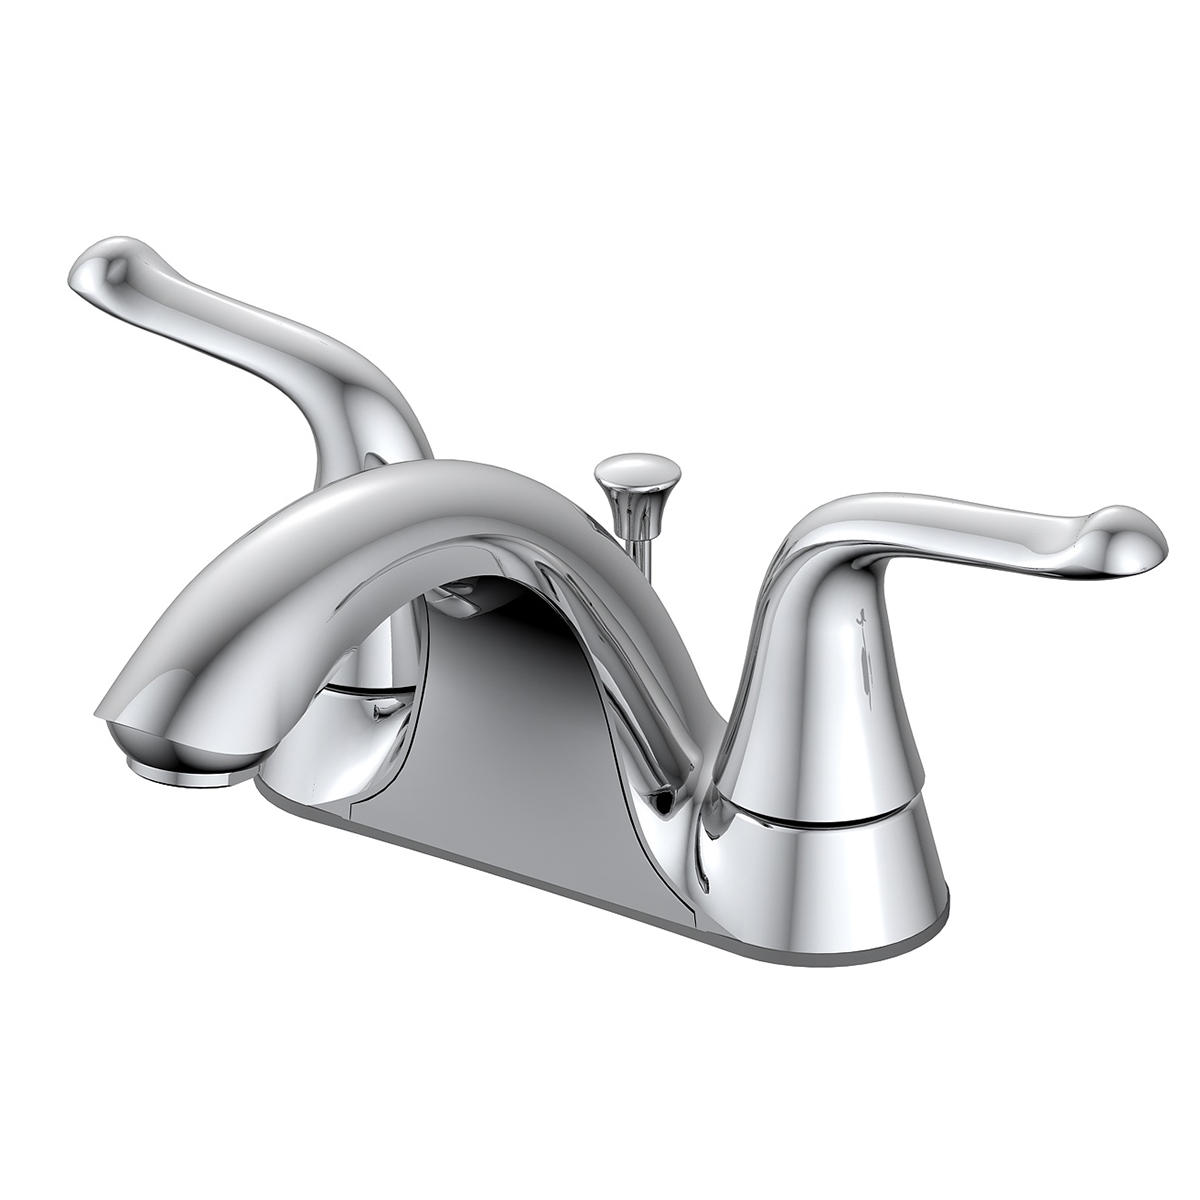 Stainless Steel Faucet Deck Mounted Bathroom Faucet